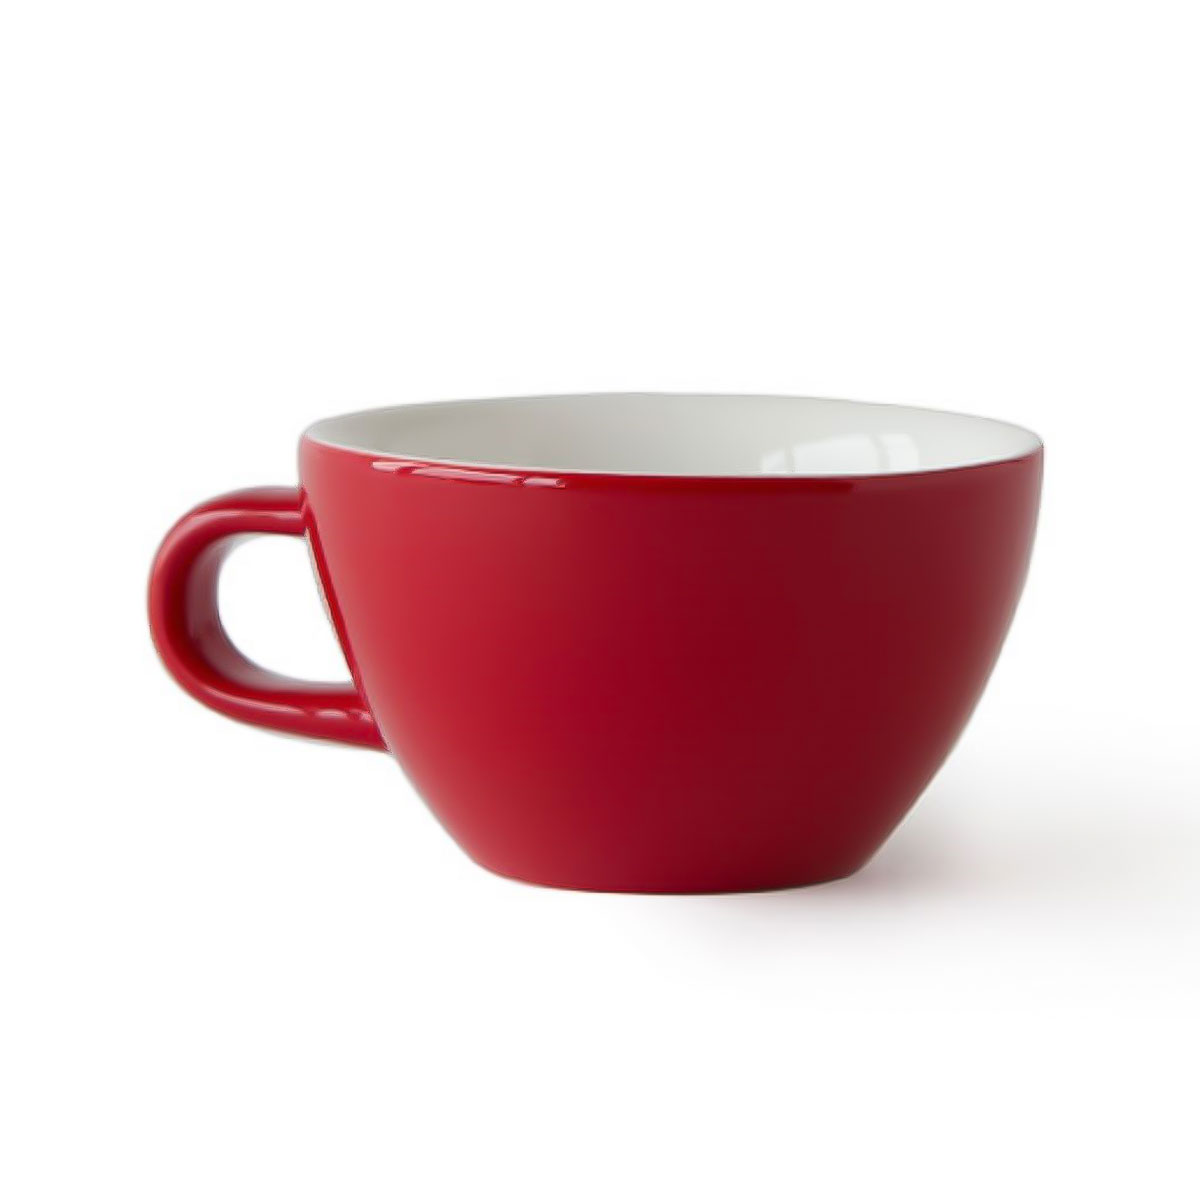 https://brewing-gadgets-media-prod.s3.ap-south-1.amazonaws.com/uae/wp-content/uploads/2022/12/ACME-Cappuccino-Red-Rata-cup-1.jpg